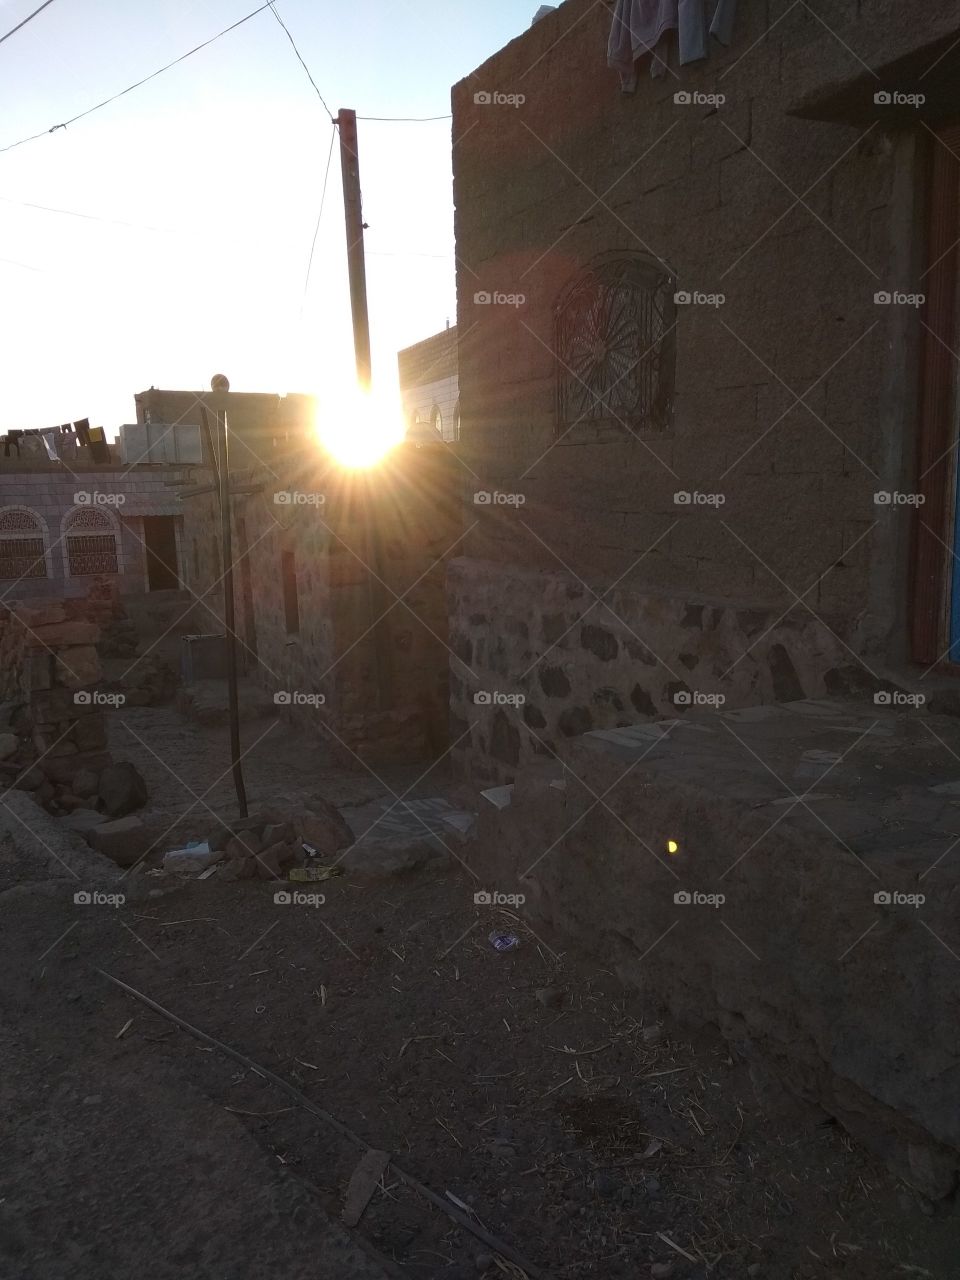 Catching the sun at uncomplate hole at rooftops of old rural buildings.